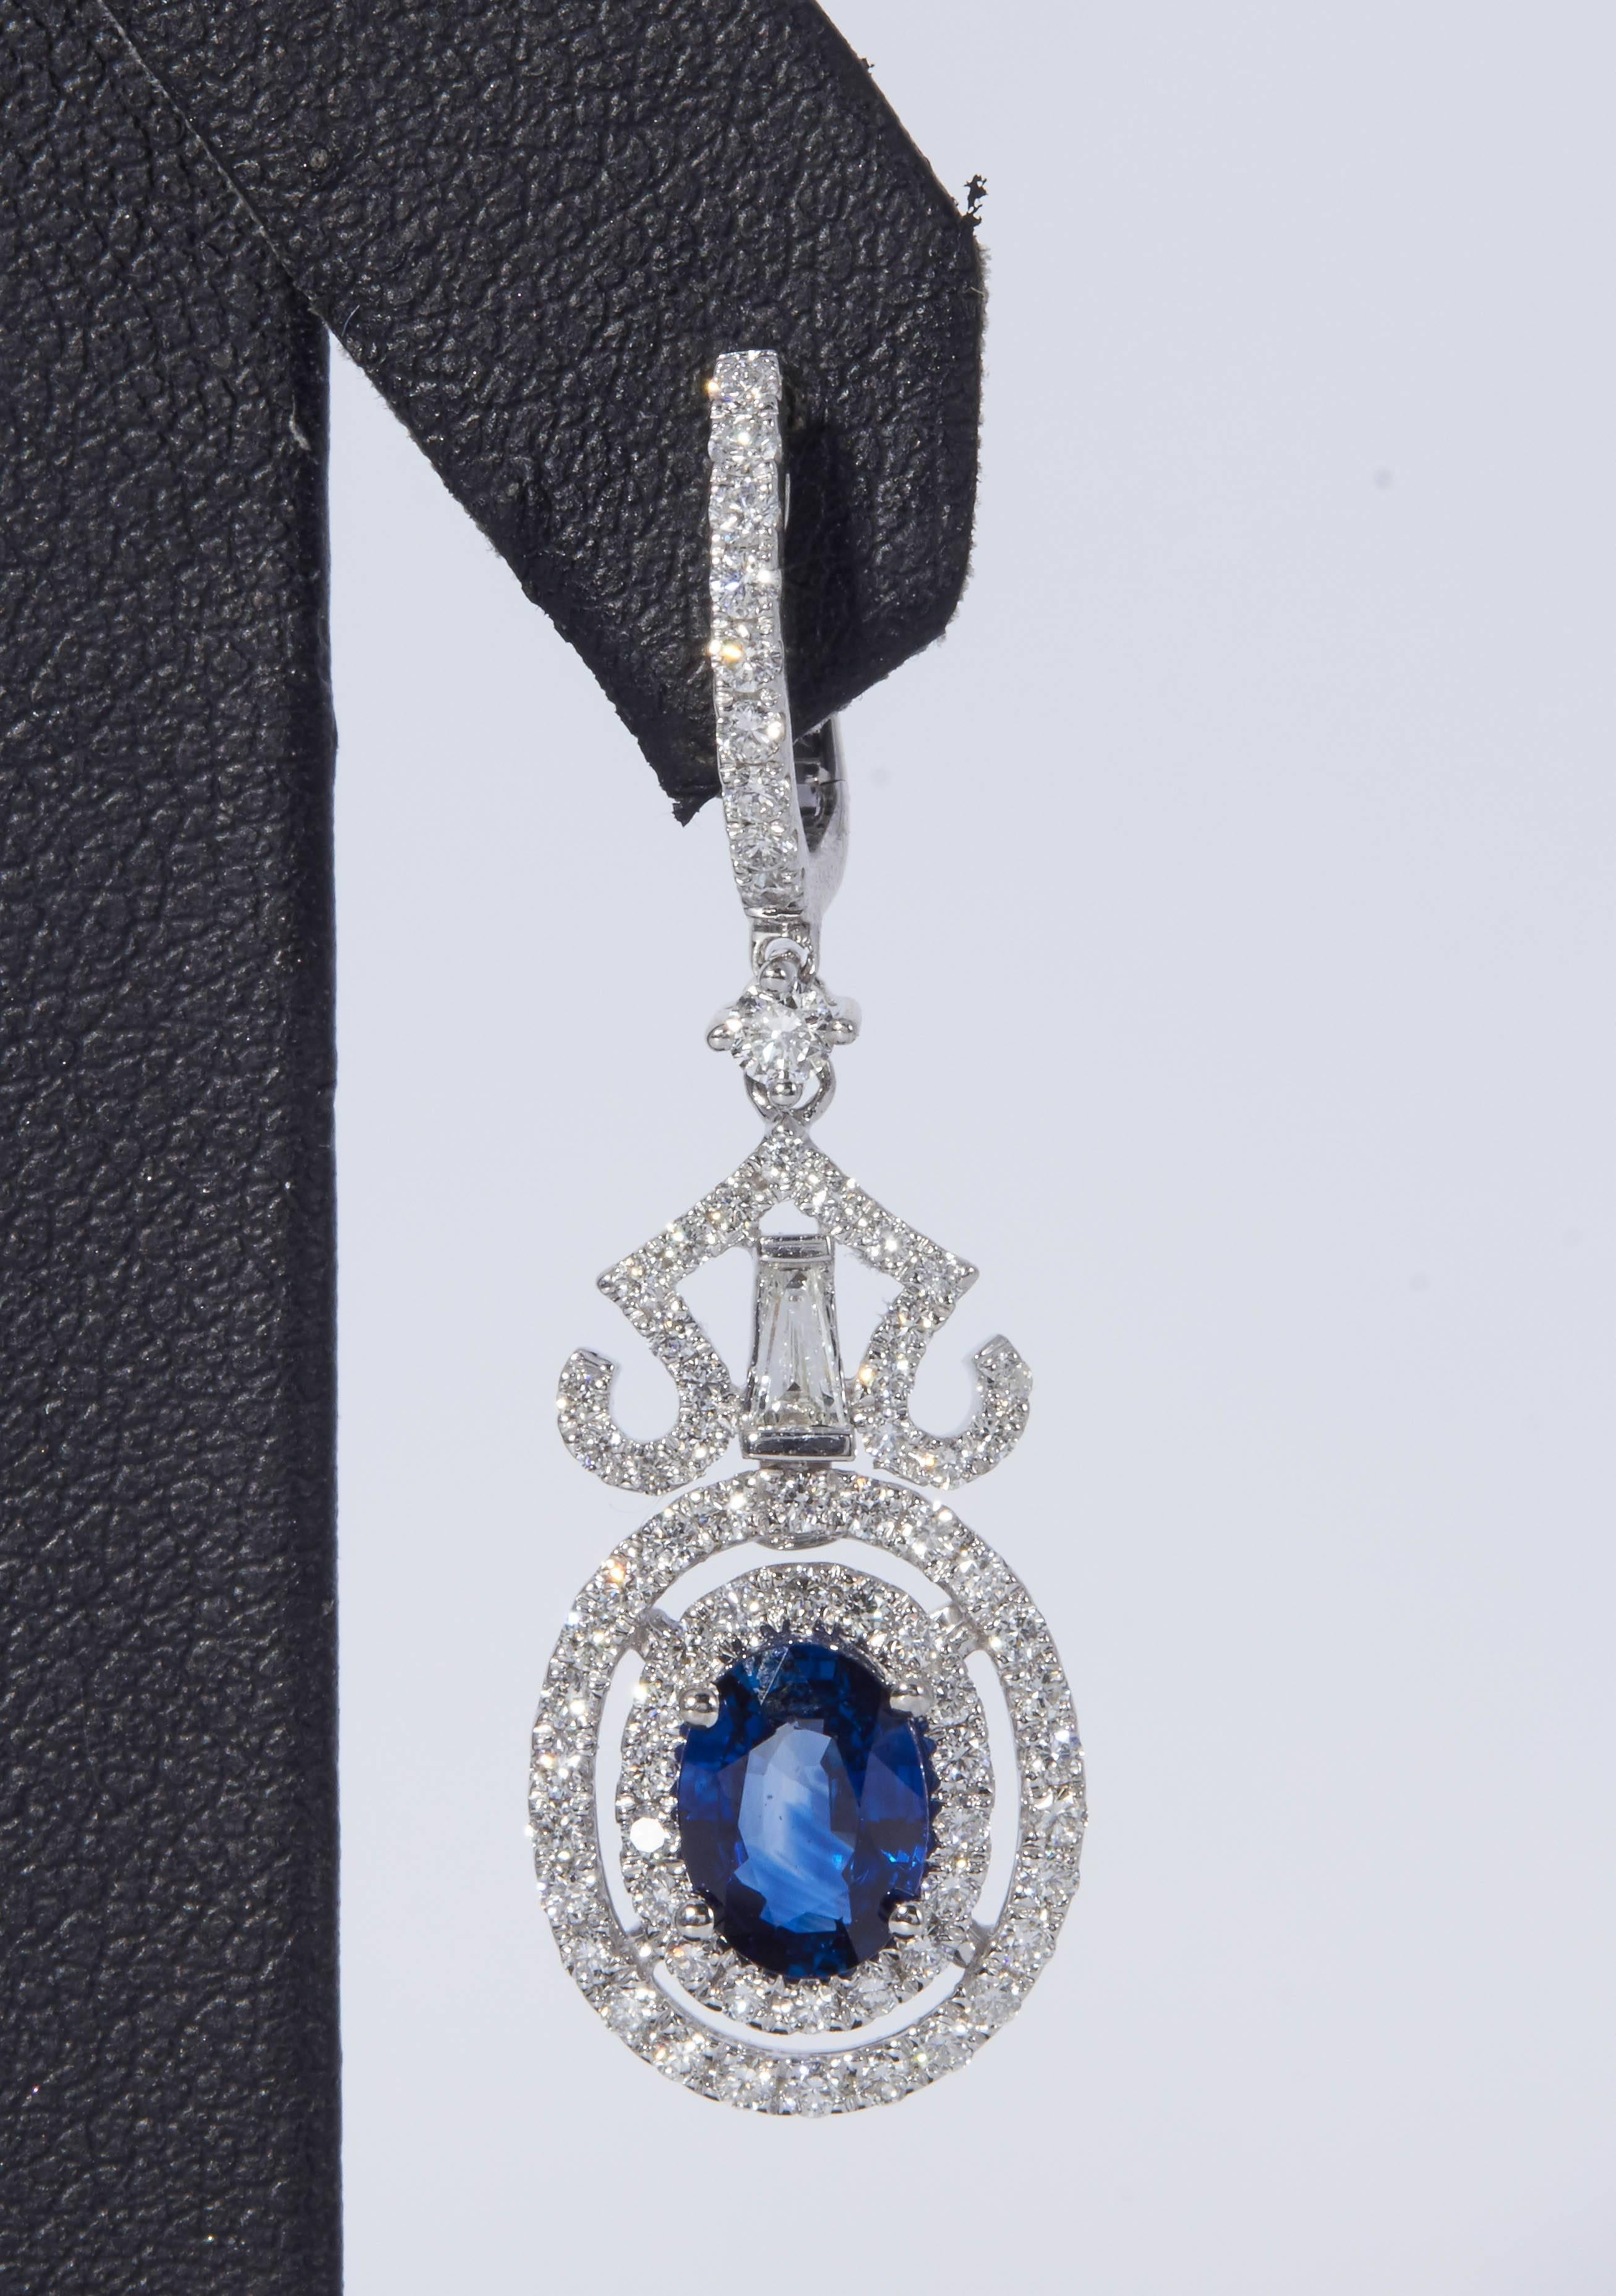 Sapphire: 1.90 Cts.
Diamonds: 1.27 Cts.
All our gemstones are genuine and are sourced with the highest degree of integrity.